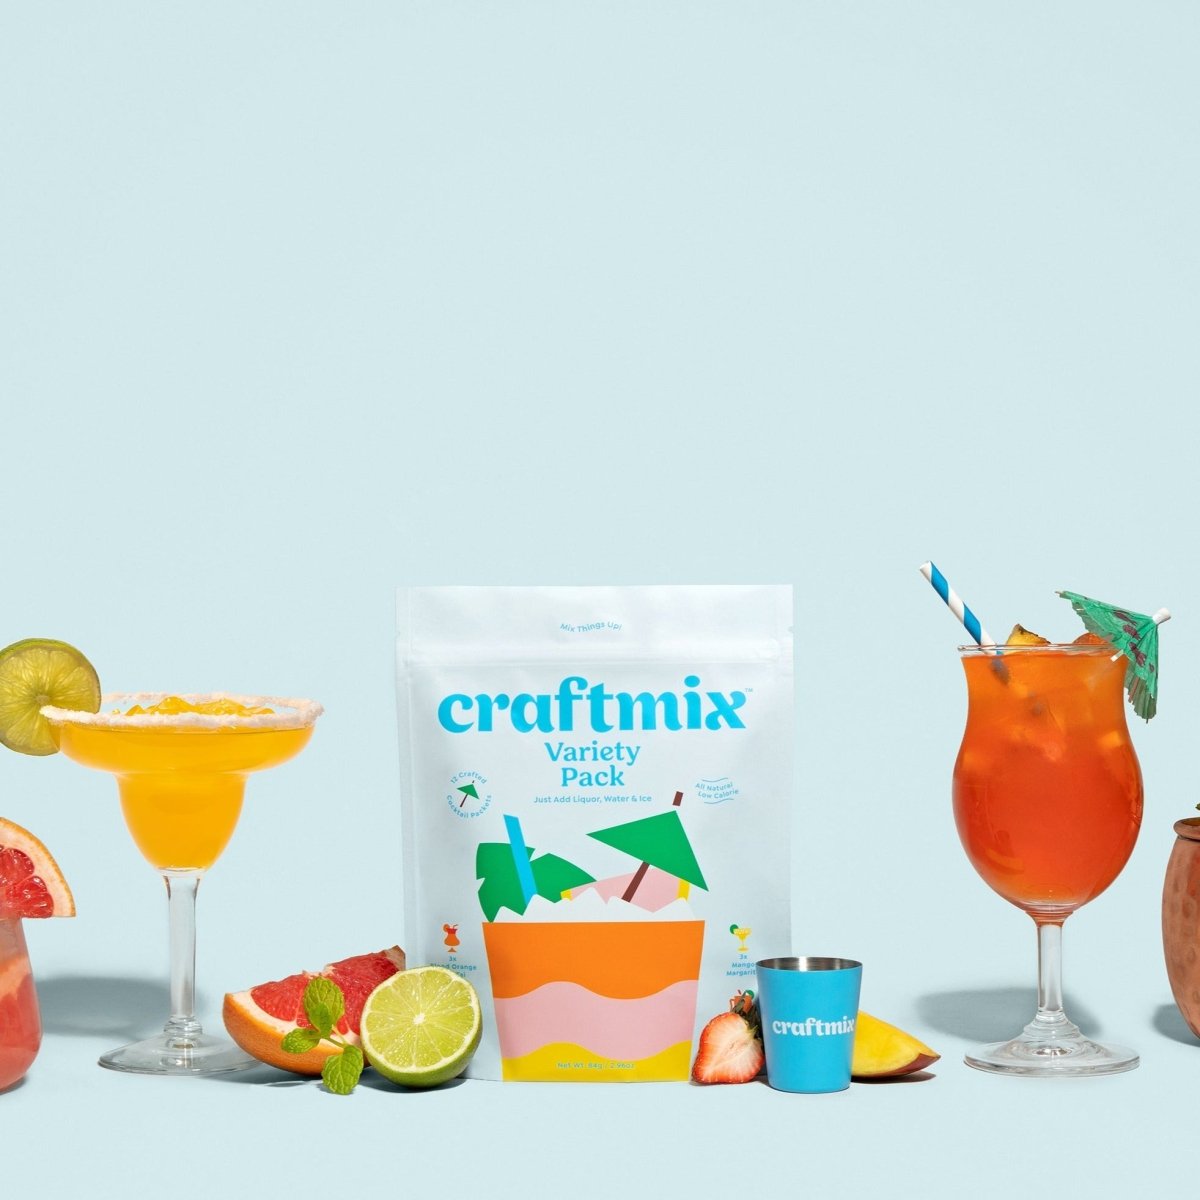 Craftmix Variety Pack, 36 Pack - lily & onyx